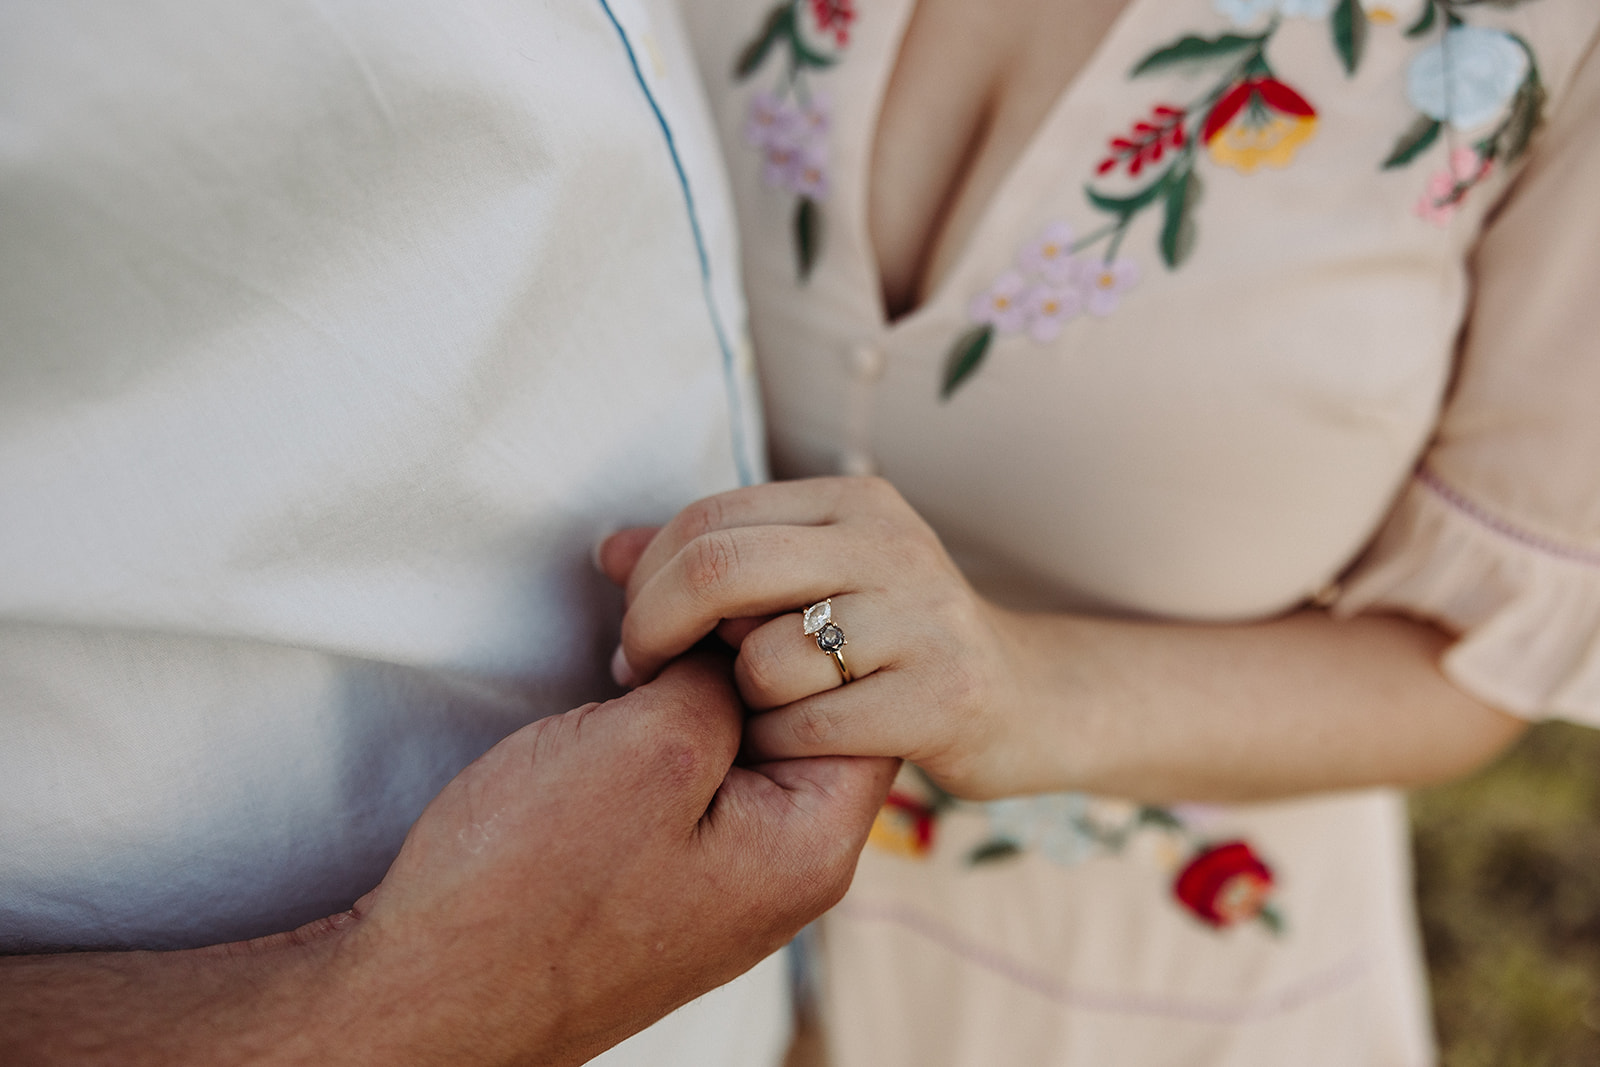 A close-up shot of engaged couple holding hands, the woman's engagement ring, and her embroidered light pink dress